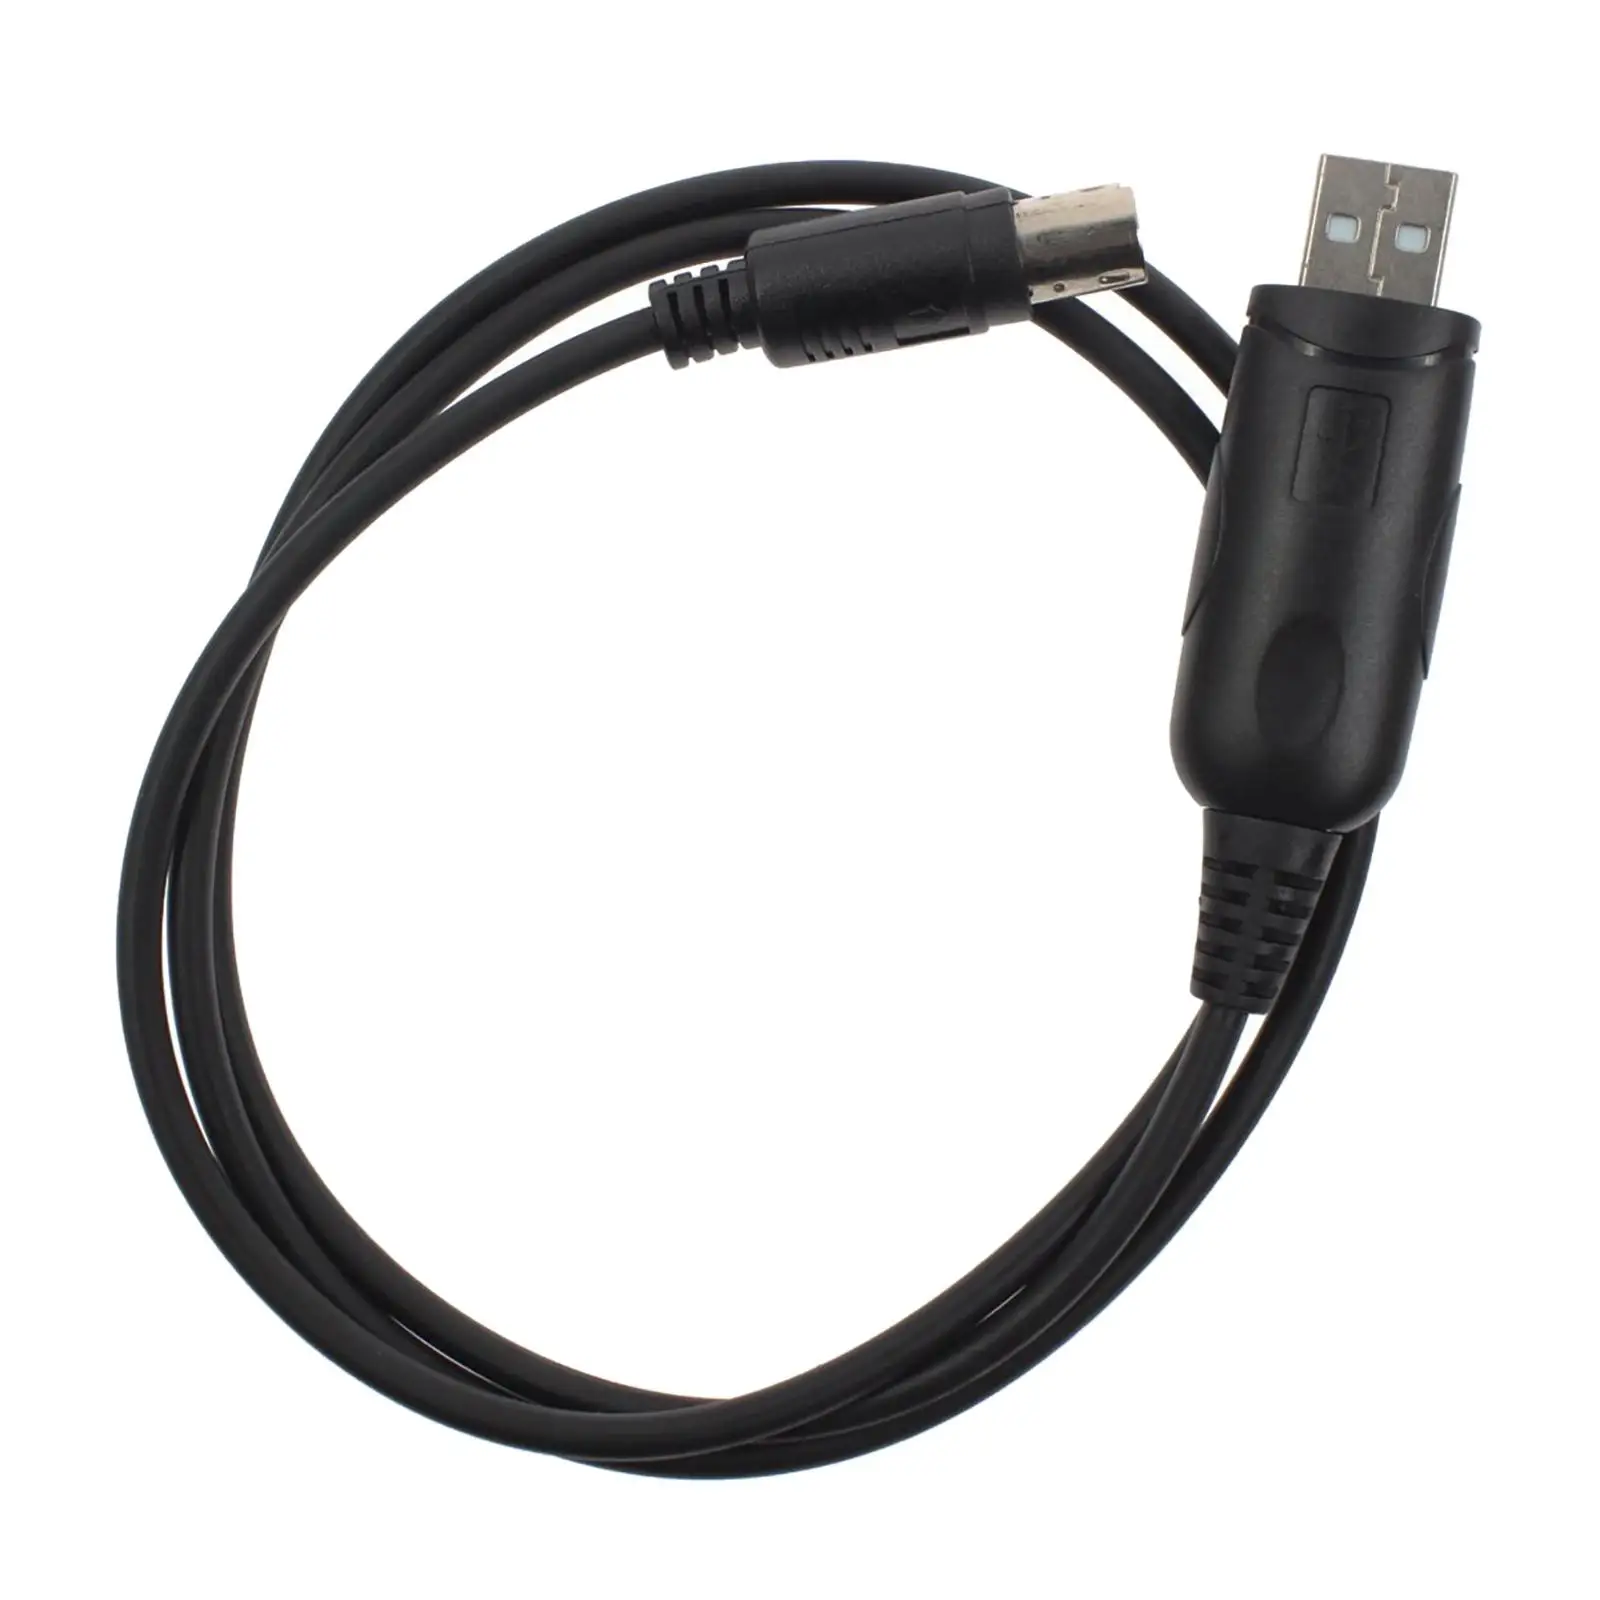 USB Programming Cable, 1M/3.28  ft-8800R, FT-8500M, FT-8500R